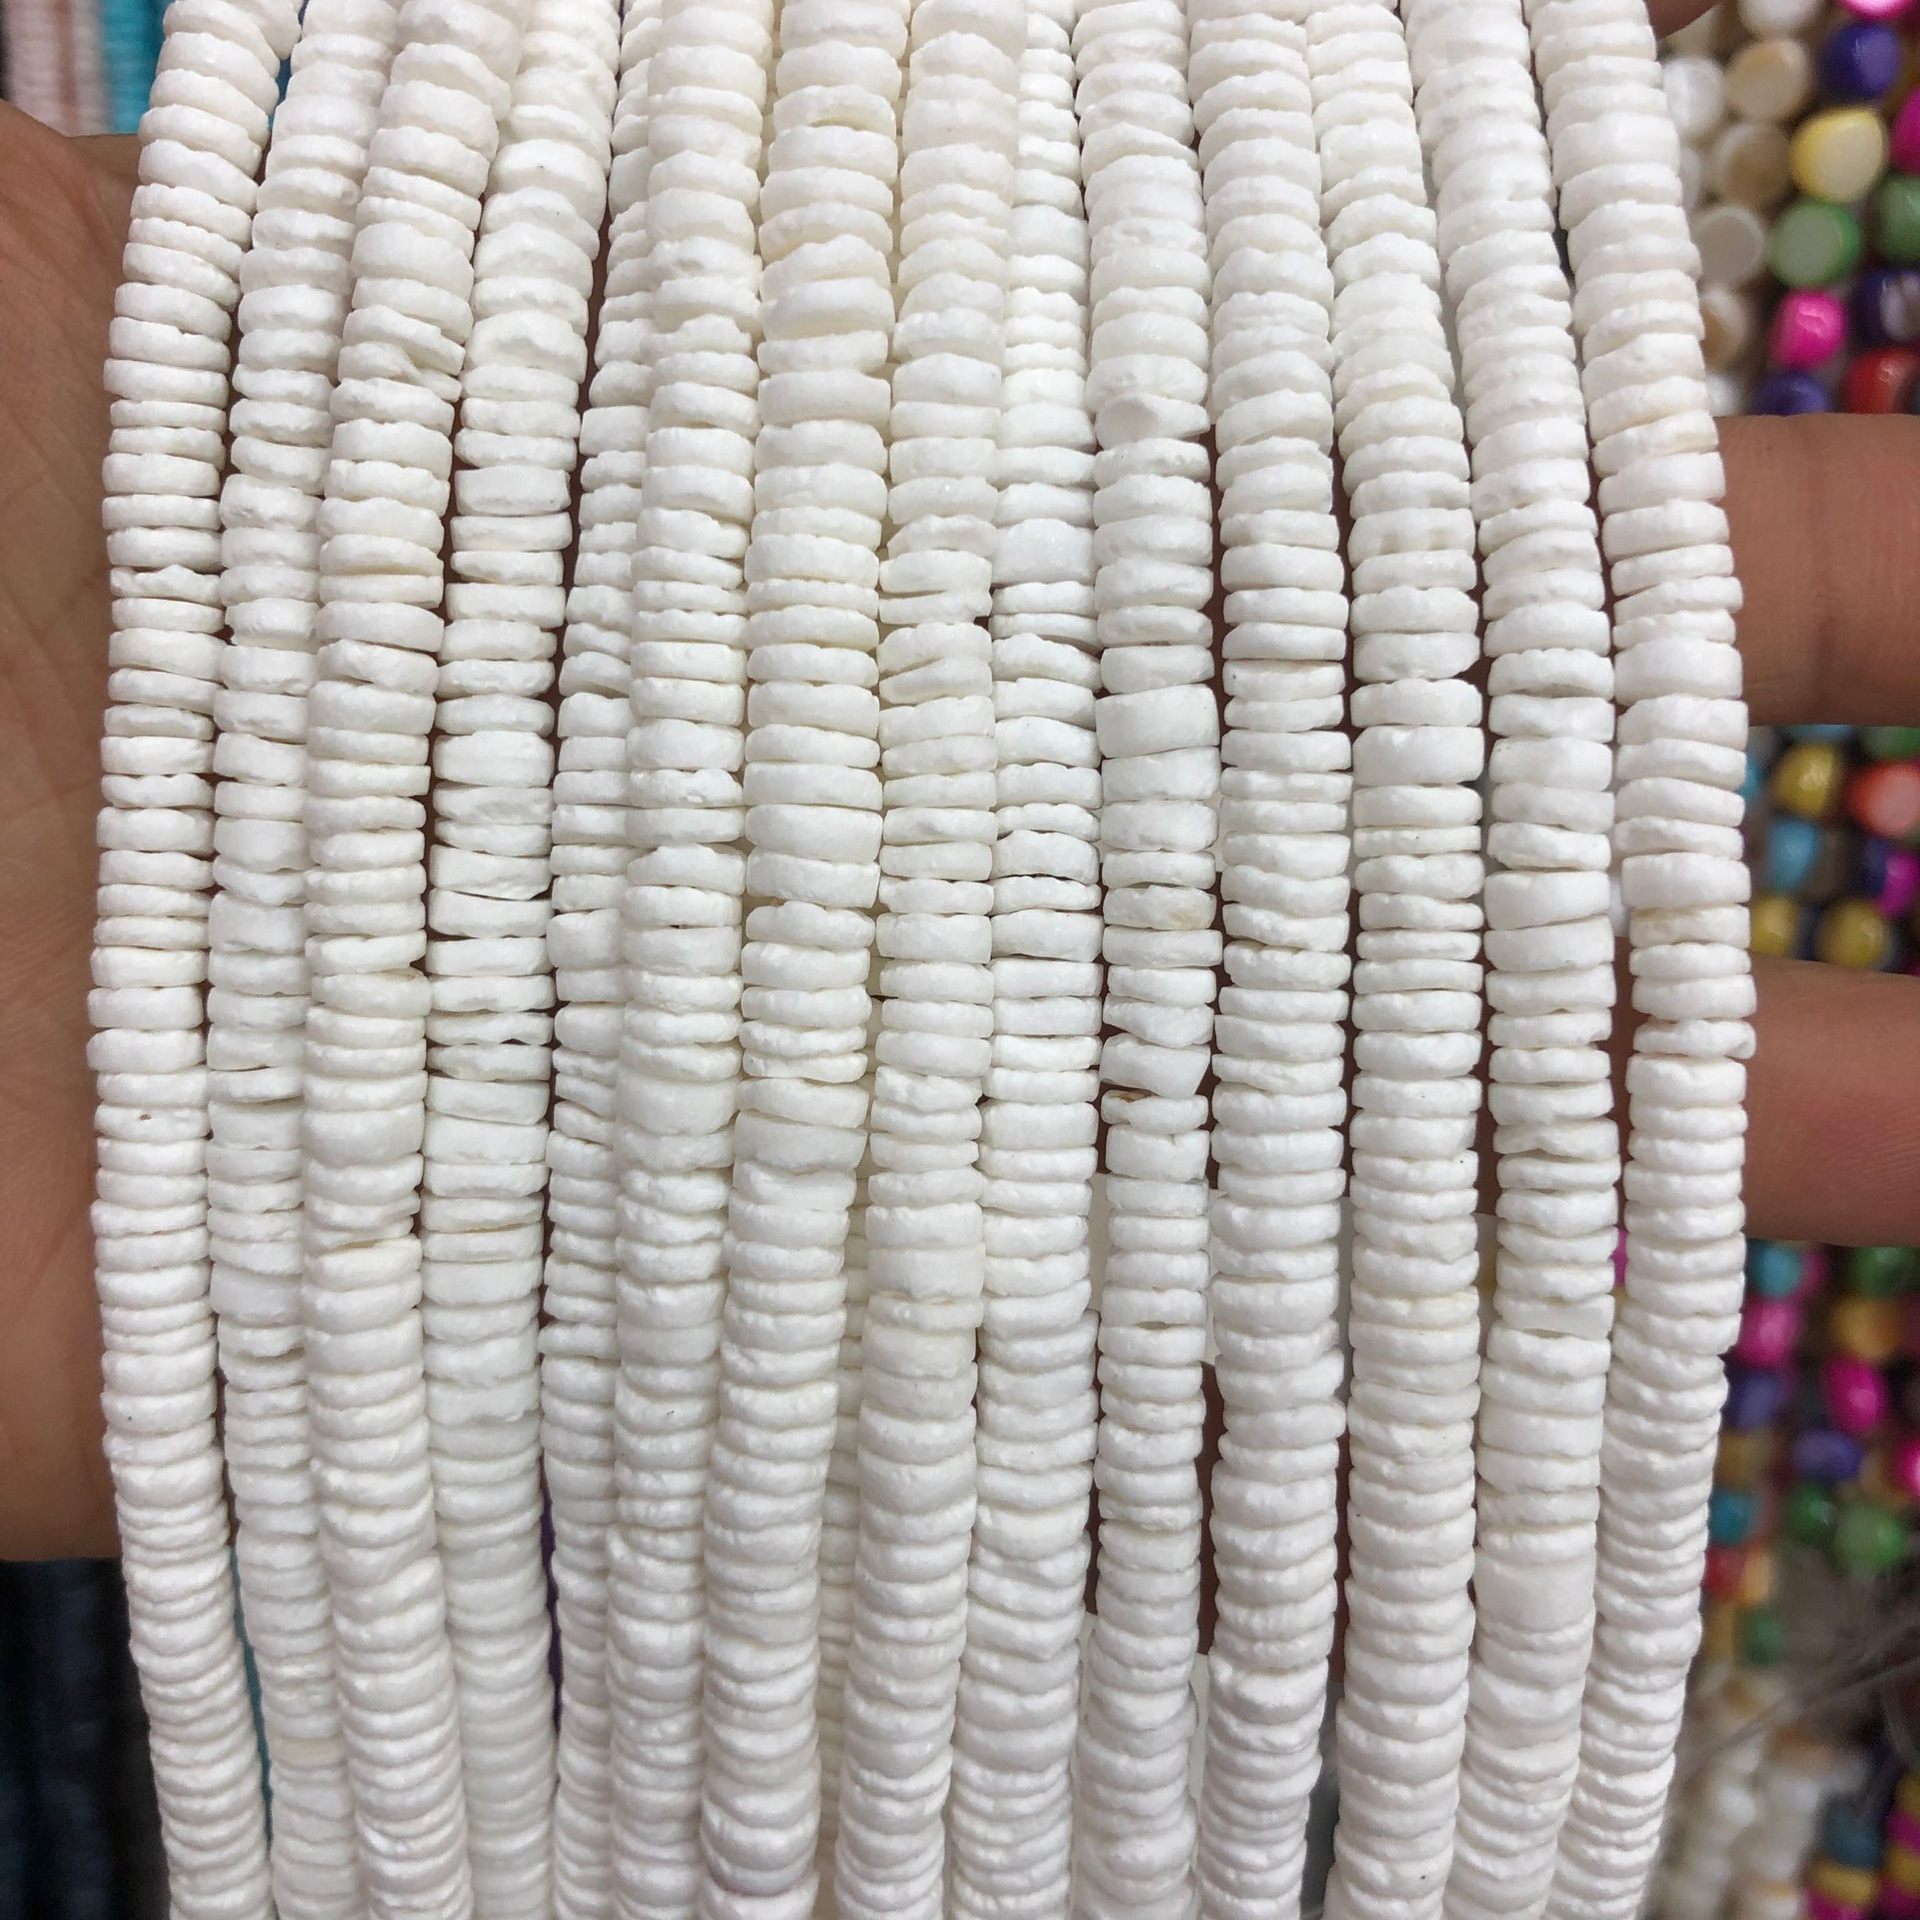 Philippine Wafer Seashell Beaded 5-6mm Ornament Accessories Bracelet Semi-Finished Accessories Amazon Hot Selling Product